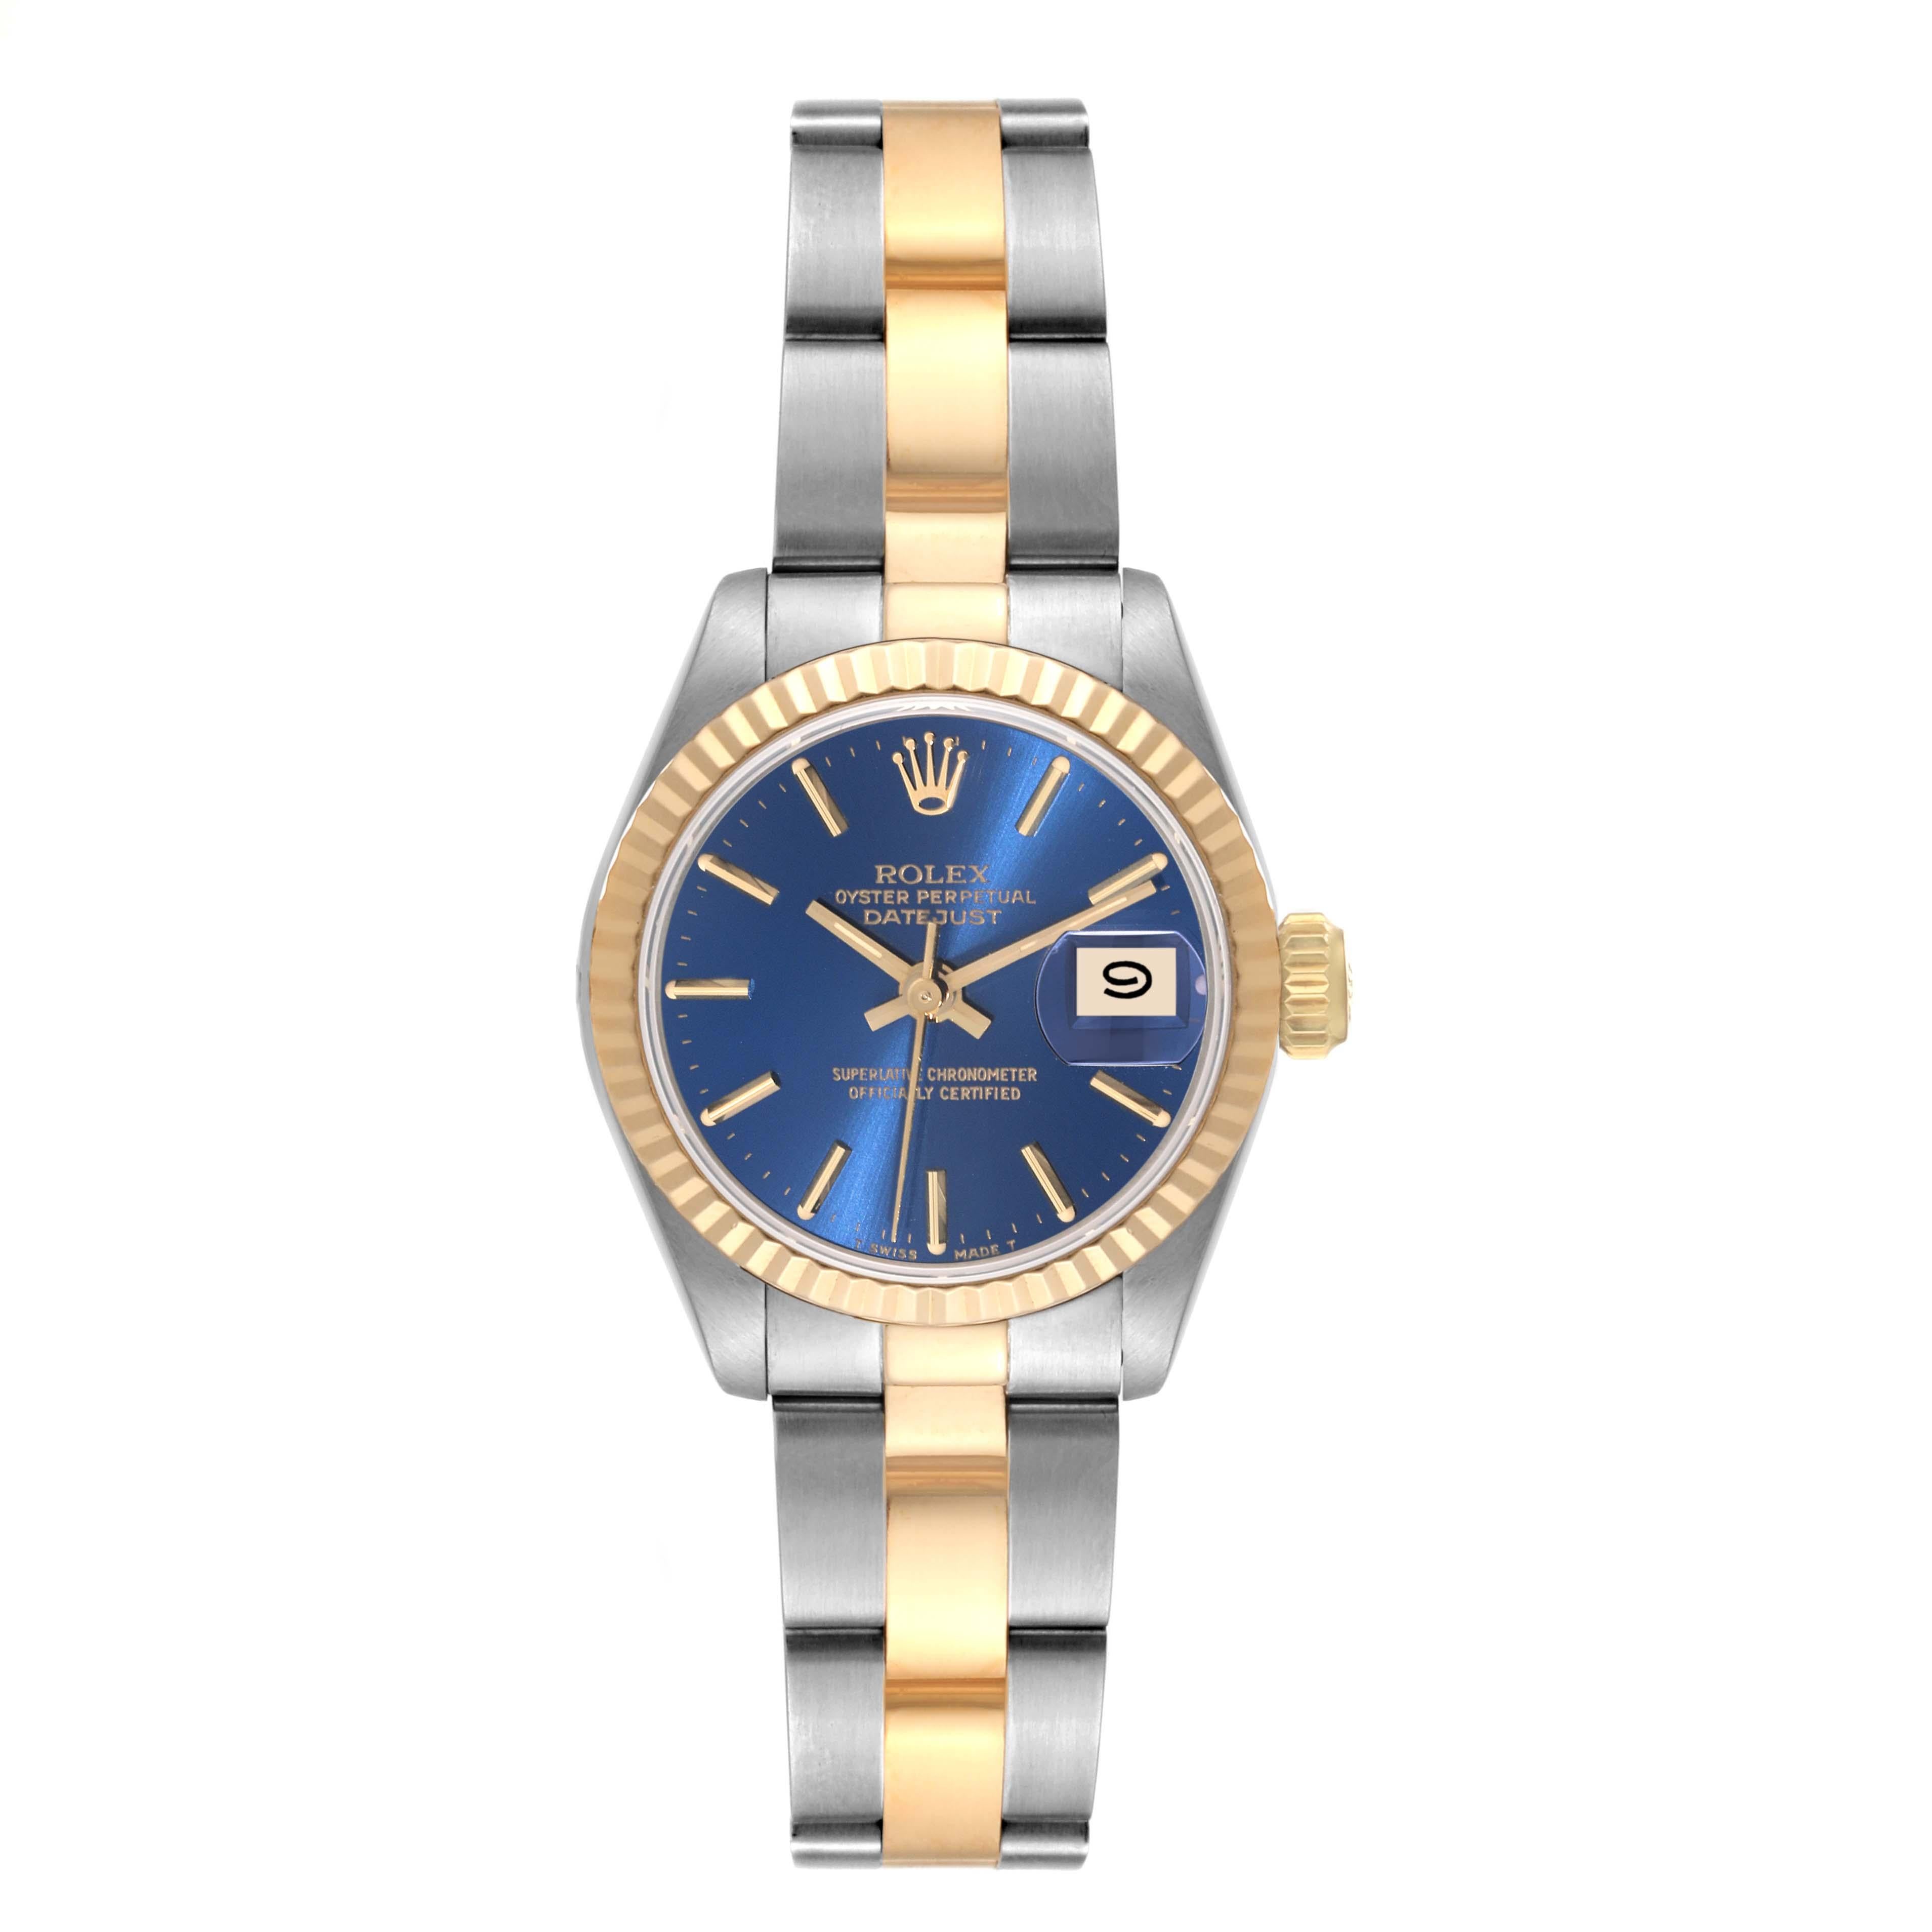 Rolex Datejust Steel Yellow Gold Blue Dial Ladies Watch 69173 Box Papers. Officially certified chronometer automatic self-winding movement. Stainless steel oyster case 26.0 mm in diameter. Rolex logo on the crown. 18k yellow gold fluted bezel.